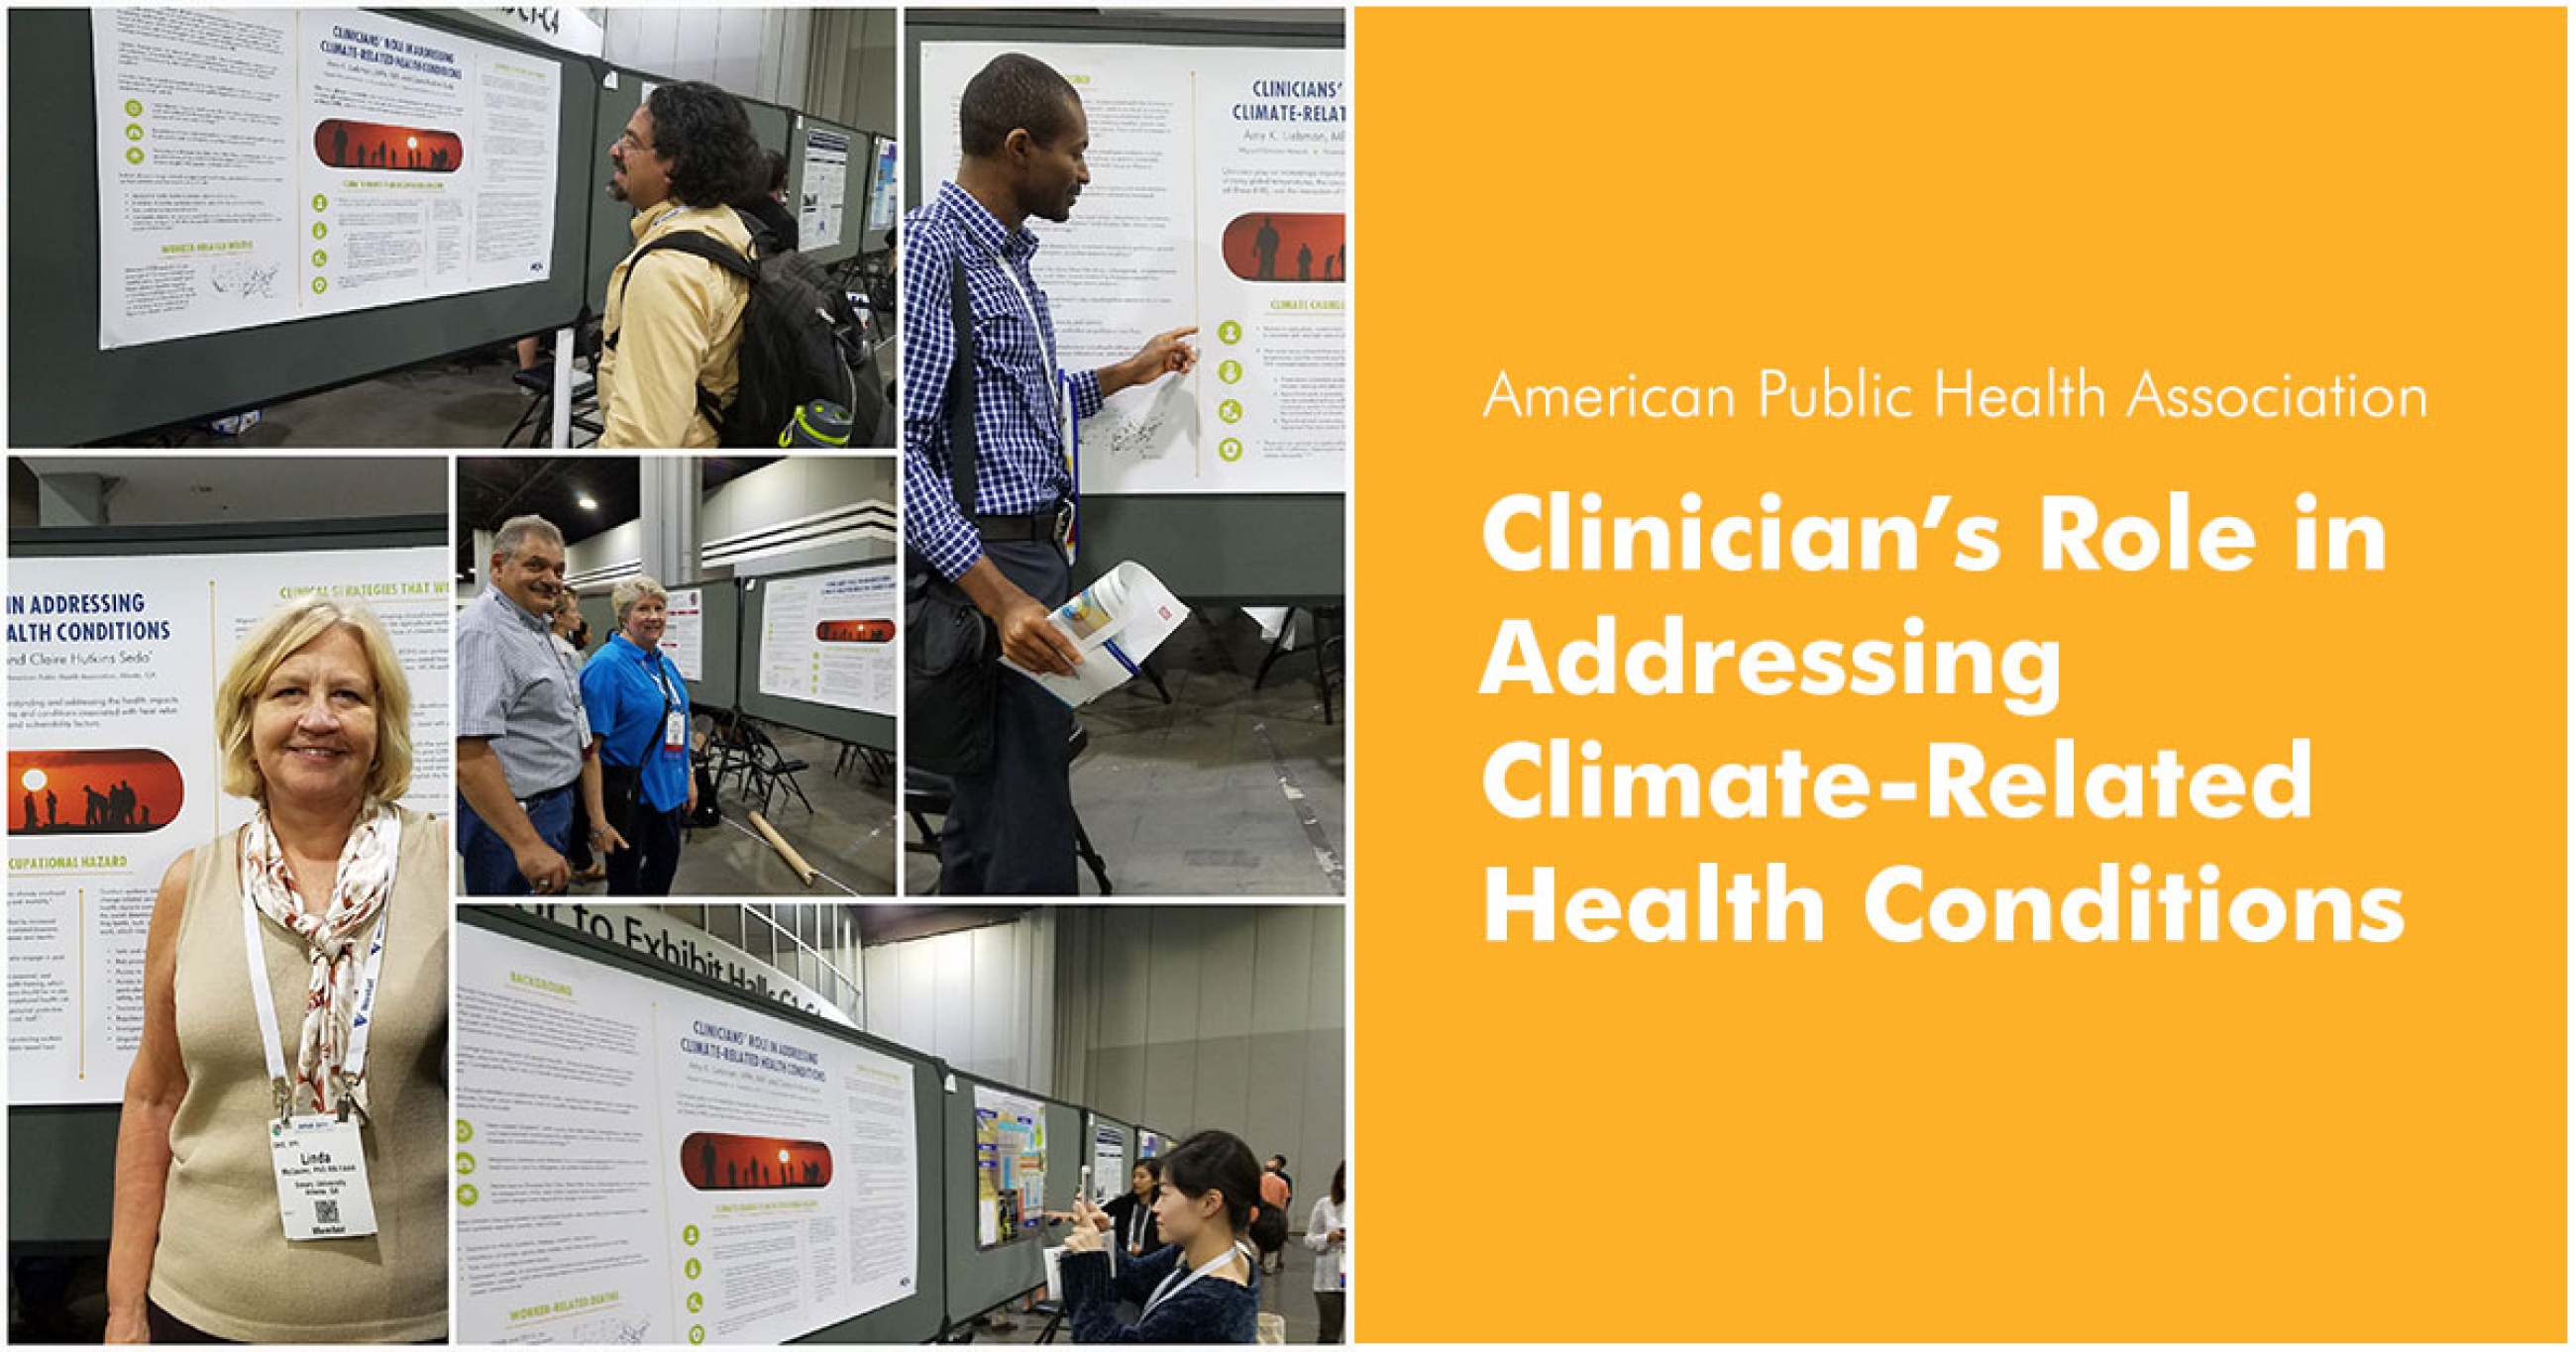 MCN's APHA Poster Presentation Clinicians' Role in Addressing Climate